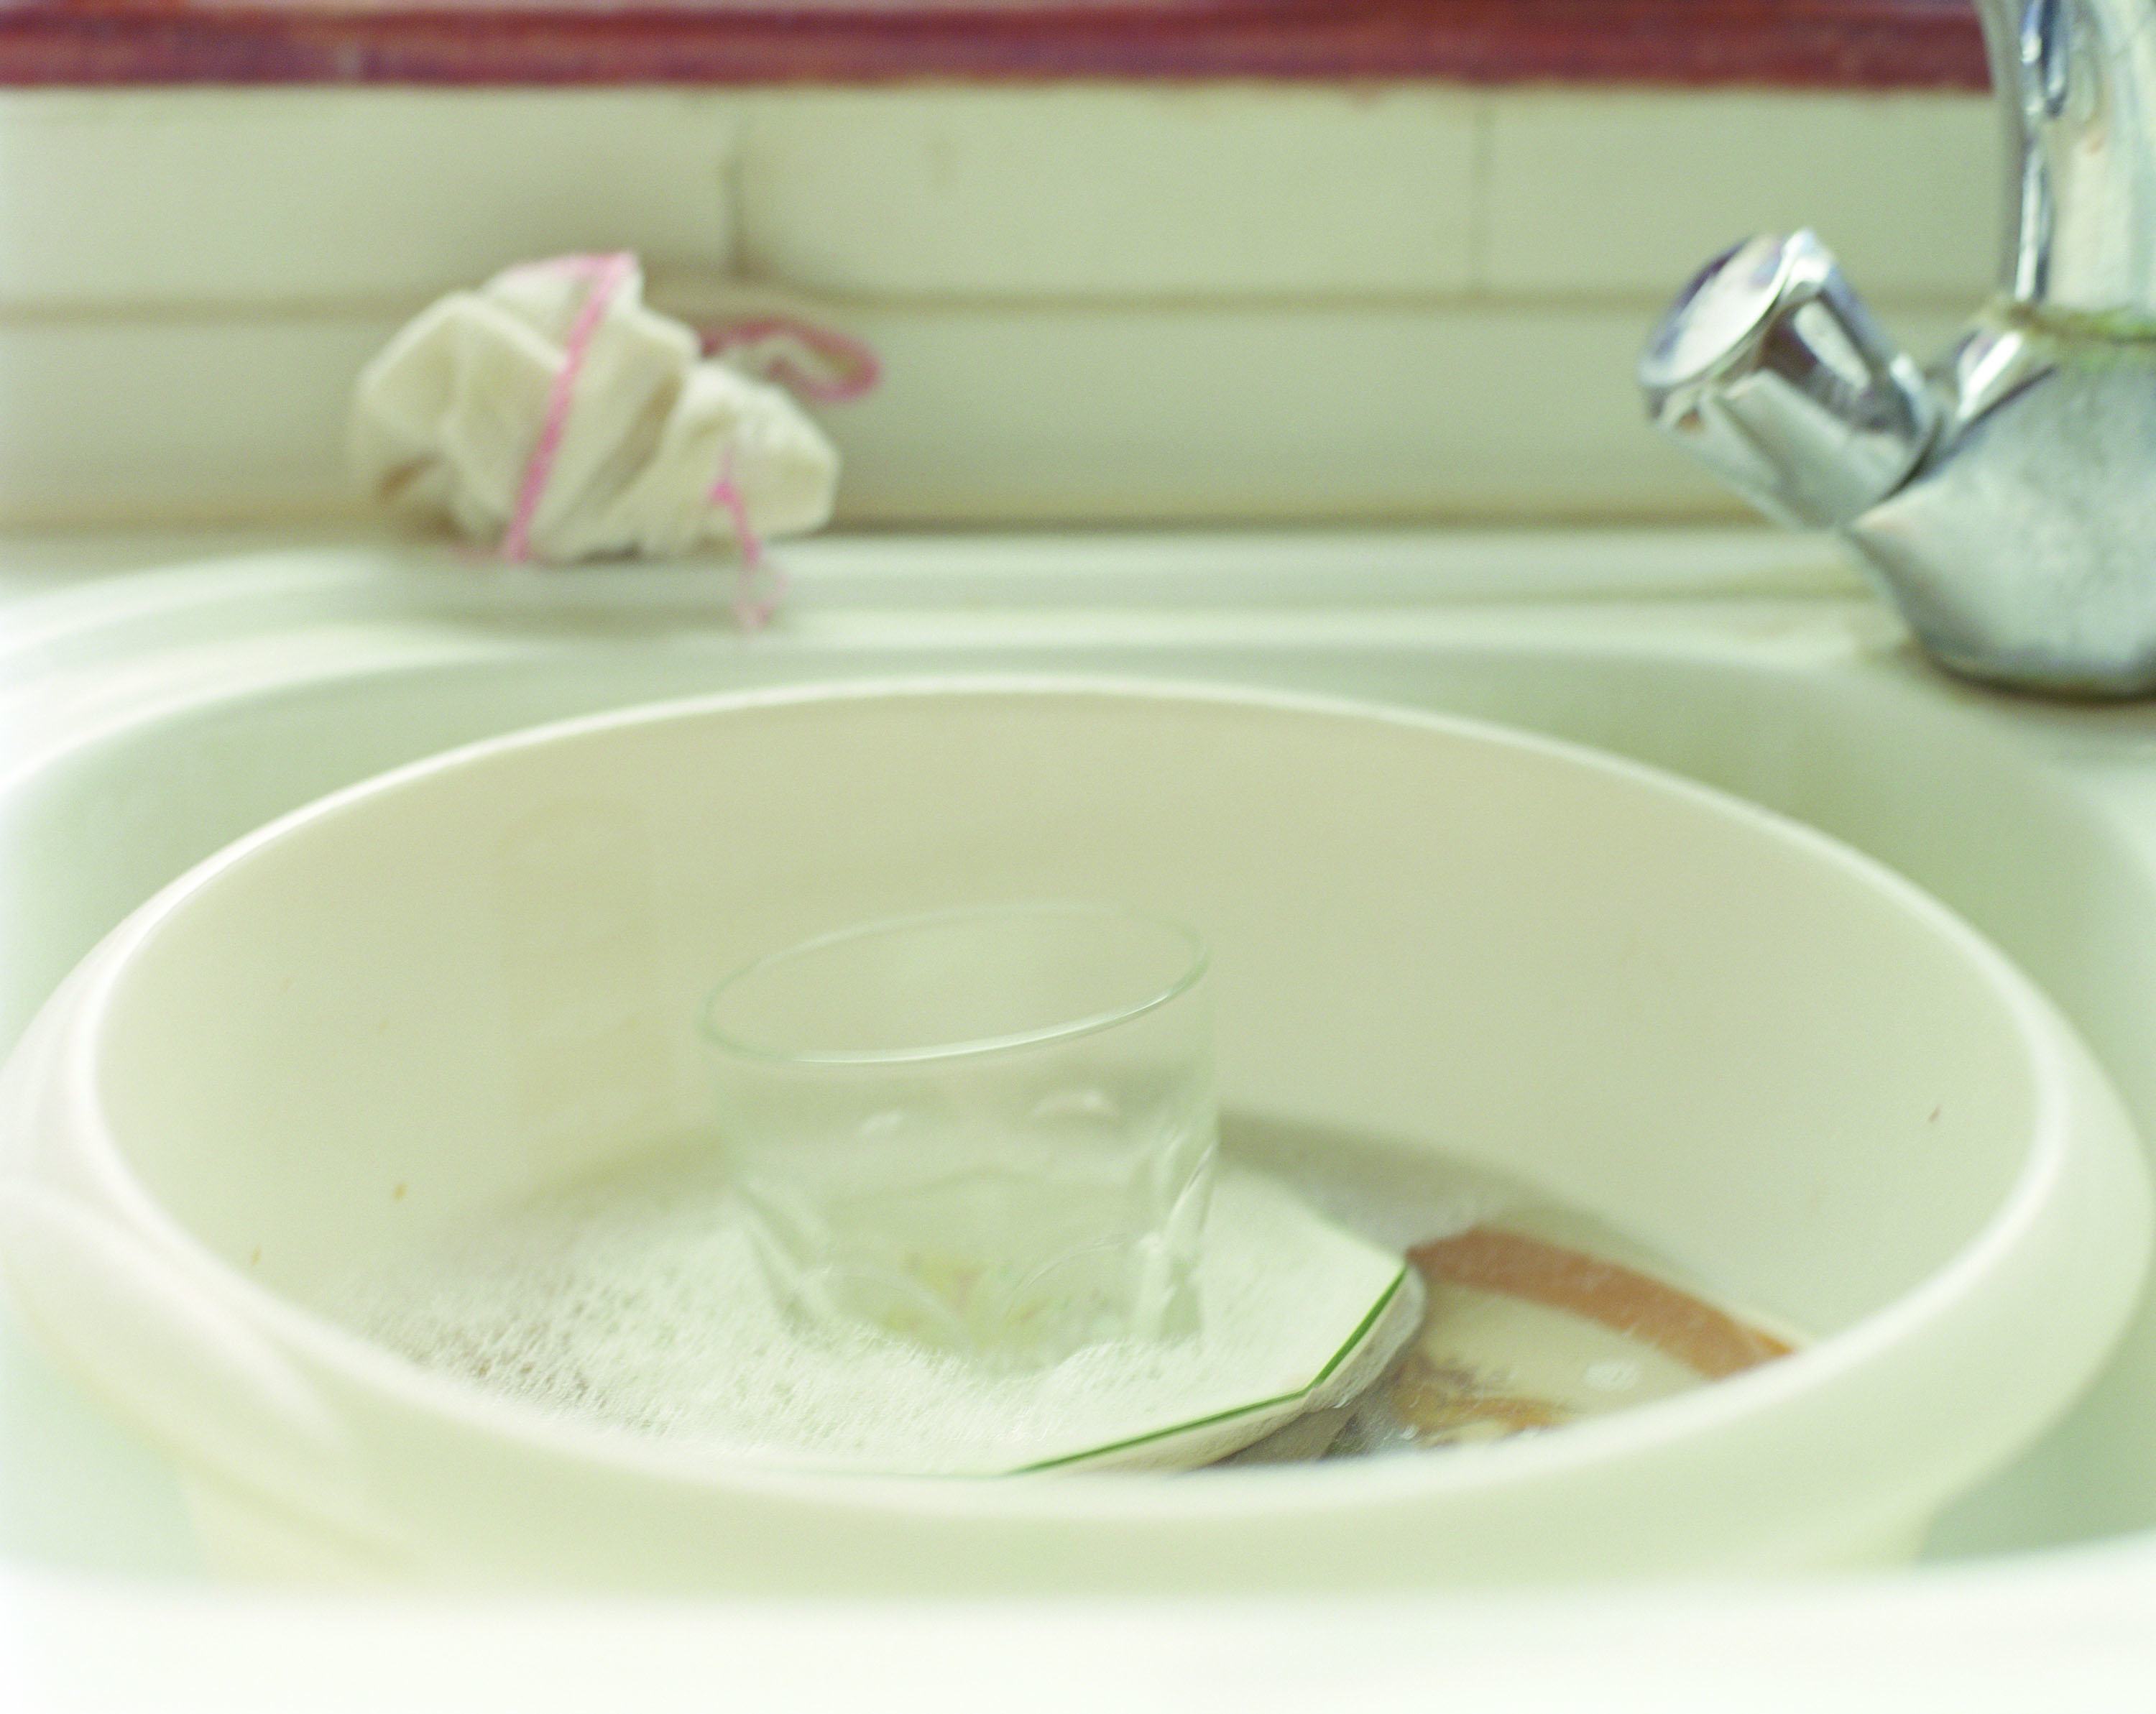 Sink by Emily Graham.